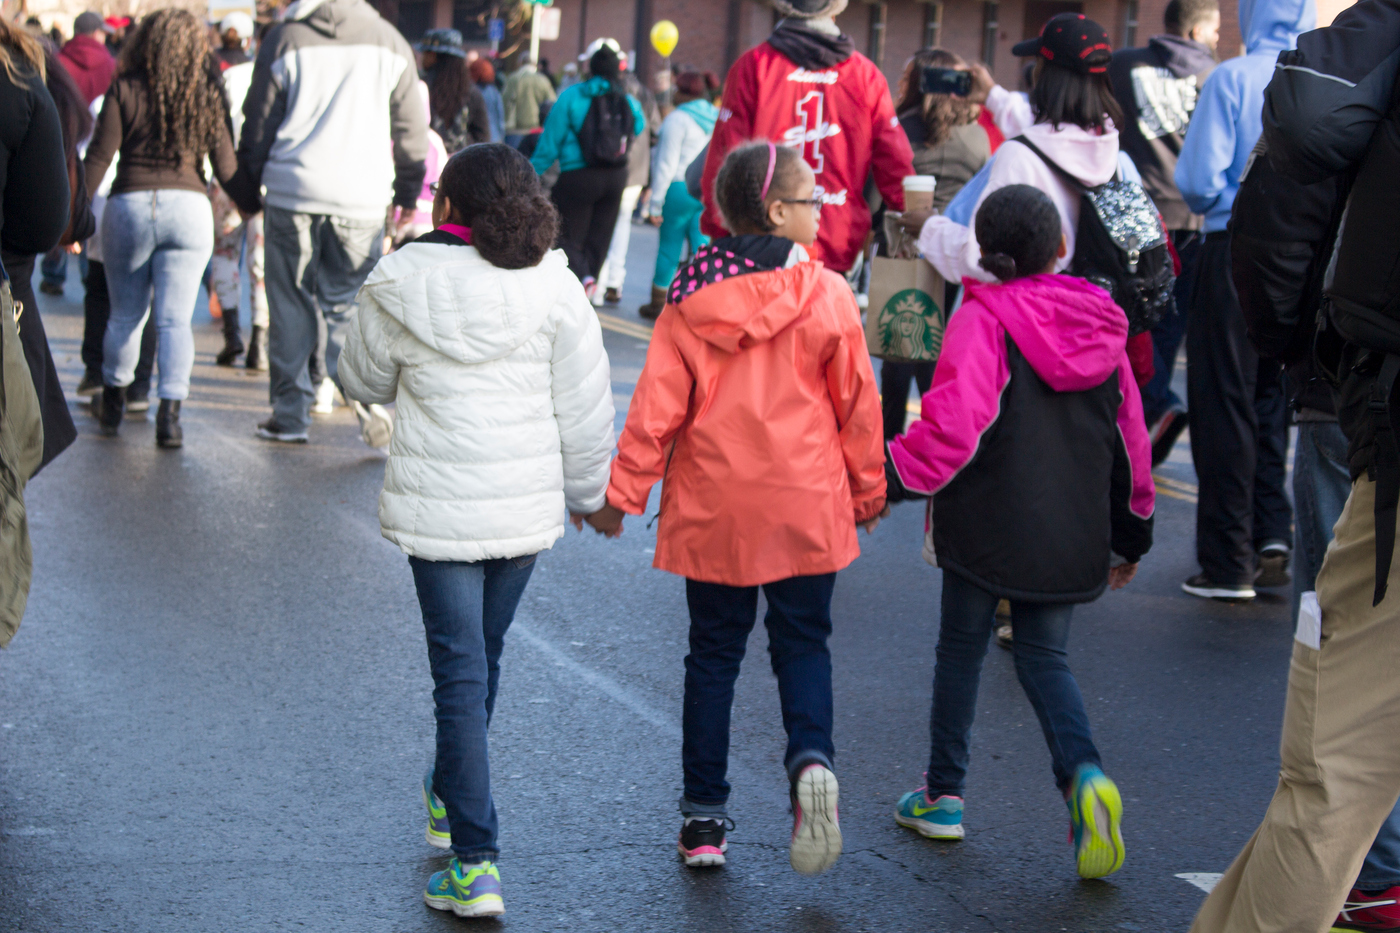 Three young girls walk while holding hands in the Martin Luther King March for the Dream. Photo by: Julie Jorgensen. juliejorgensenexpress@gmail.com